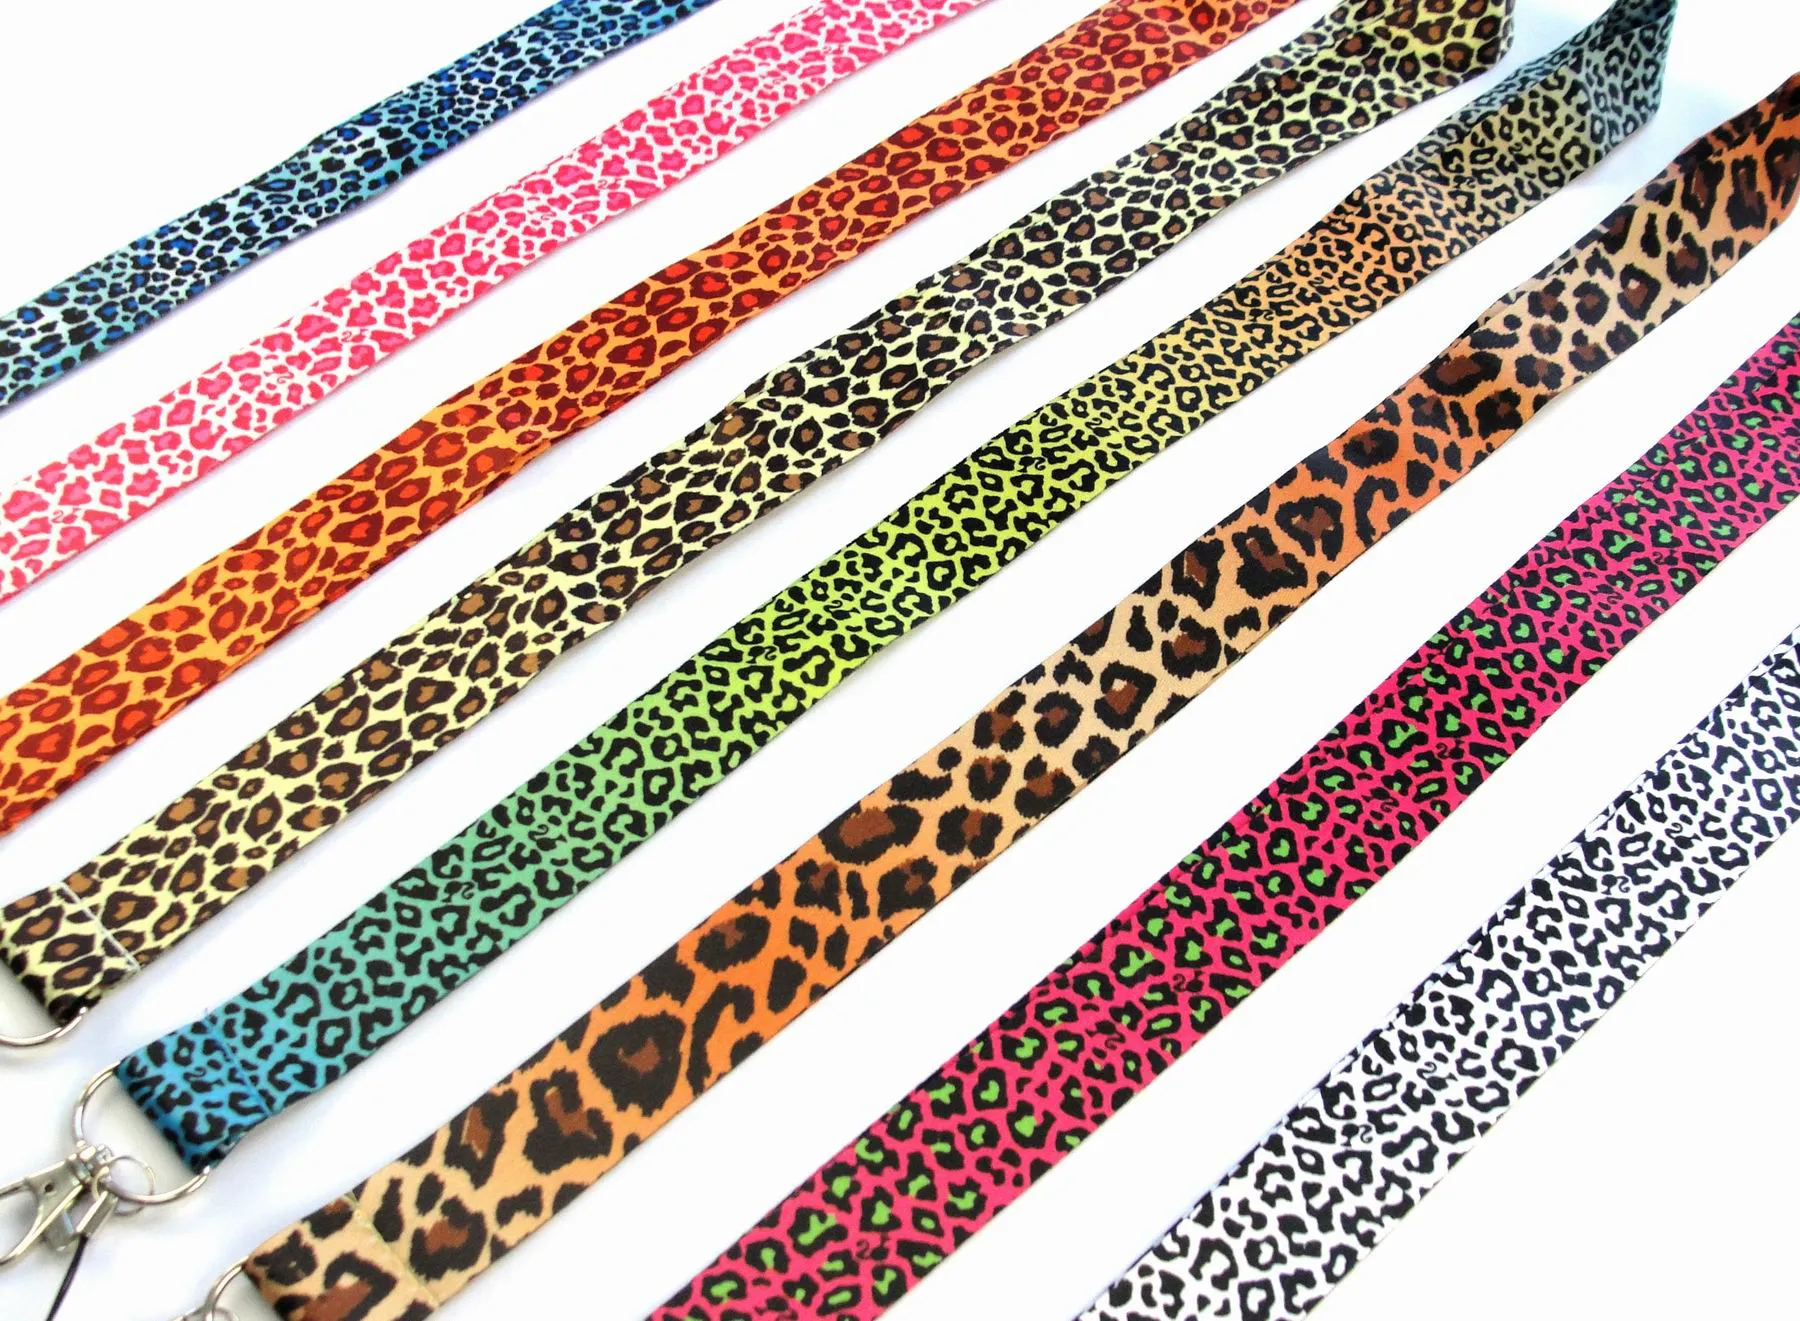 Factory Price 100pcs Leopard Print Cartoon Anime Lanyard Key Chain Neck Strap Camera ID Phone String Pendant Badge Party Gift Accessories Wholesale 2023